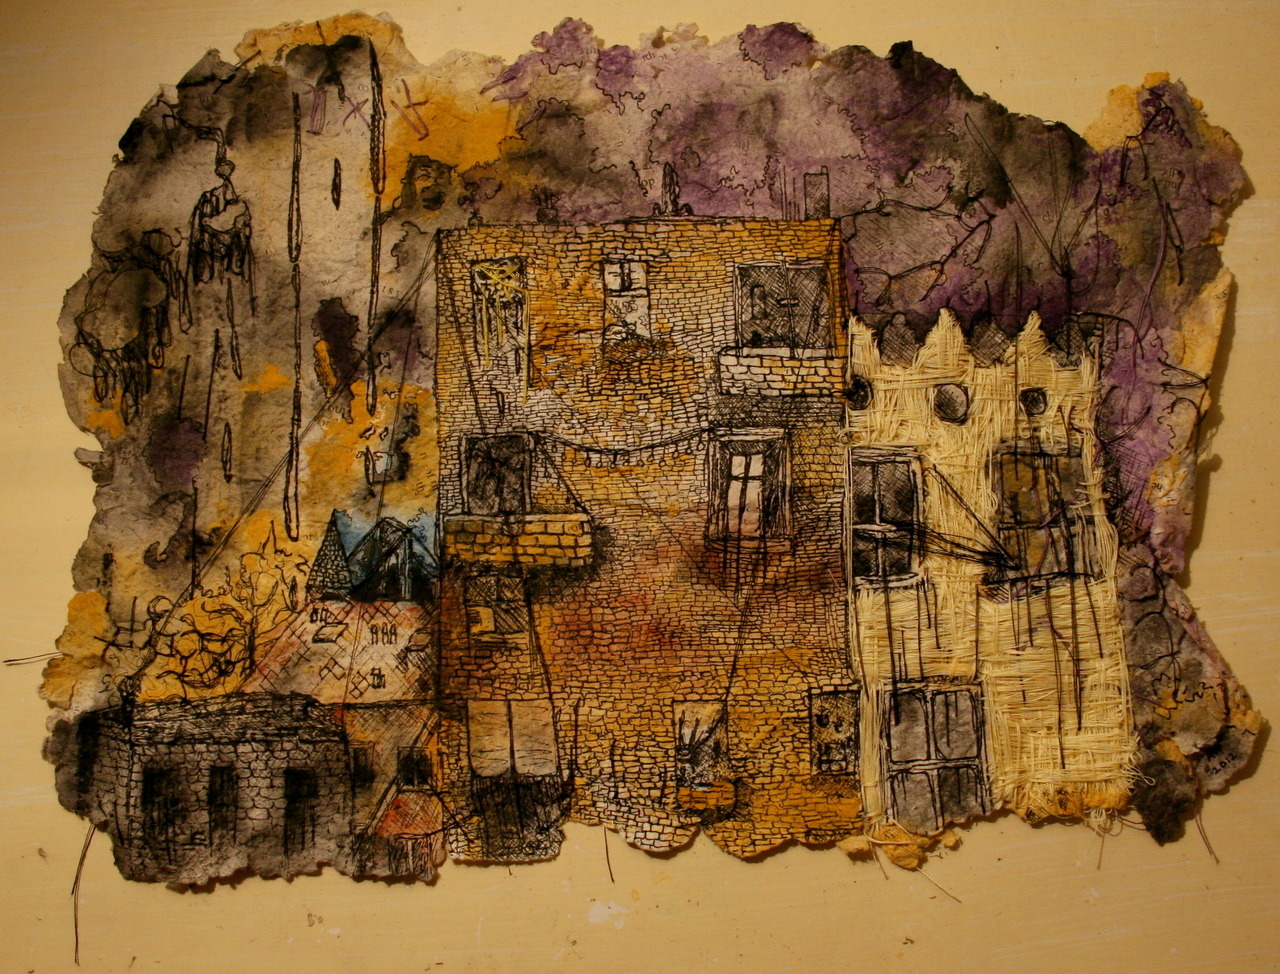 the future hangs over our heads
2012; hand embroidery, illustration, &watercolor on handmade paper
brokenbees